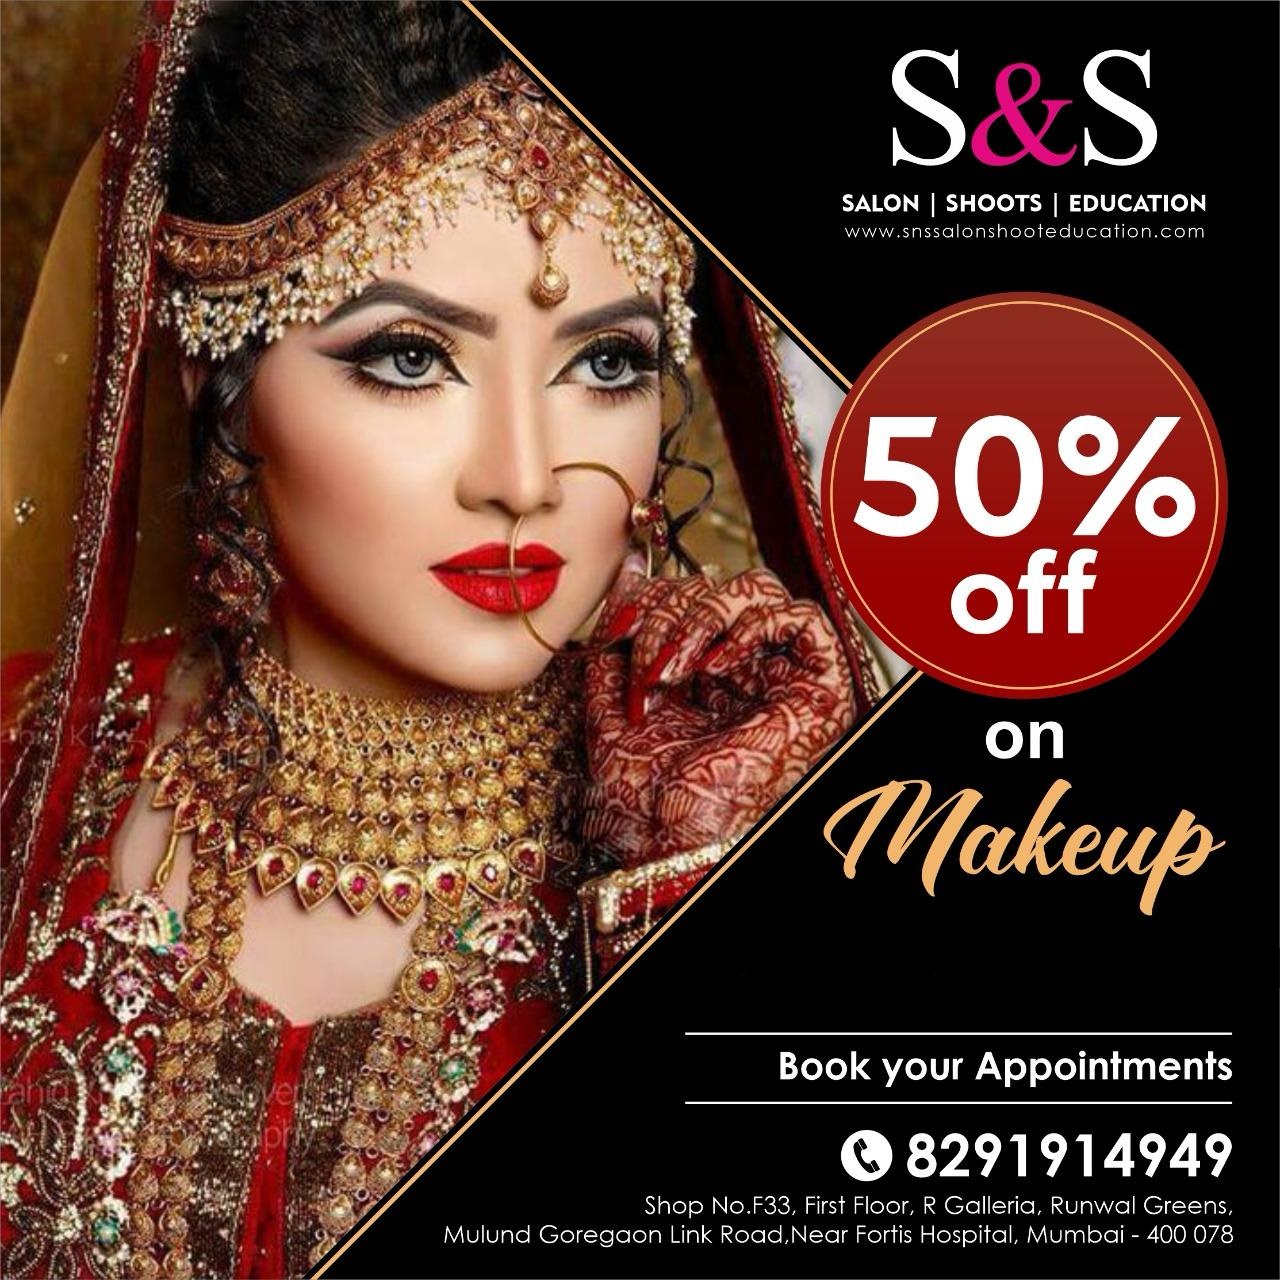 Your Ultimate Destination for Beauty and Creativity!